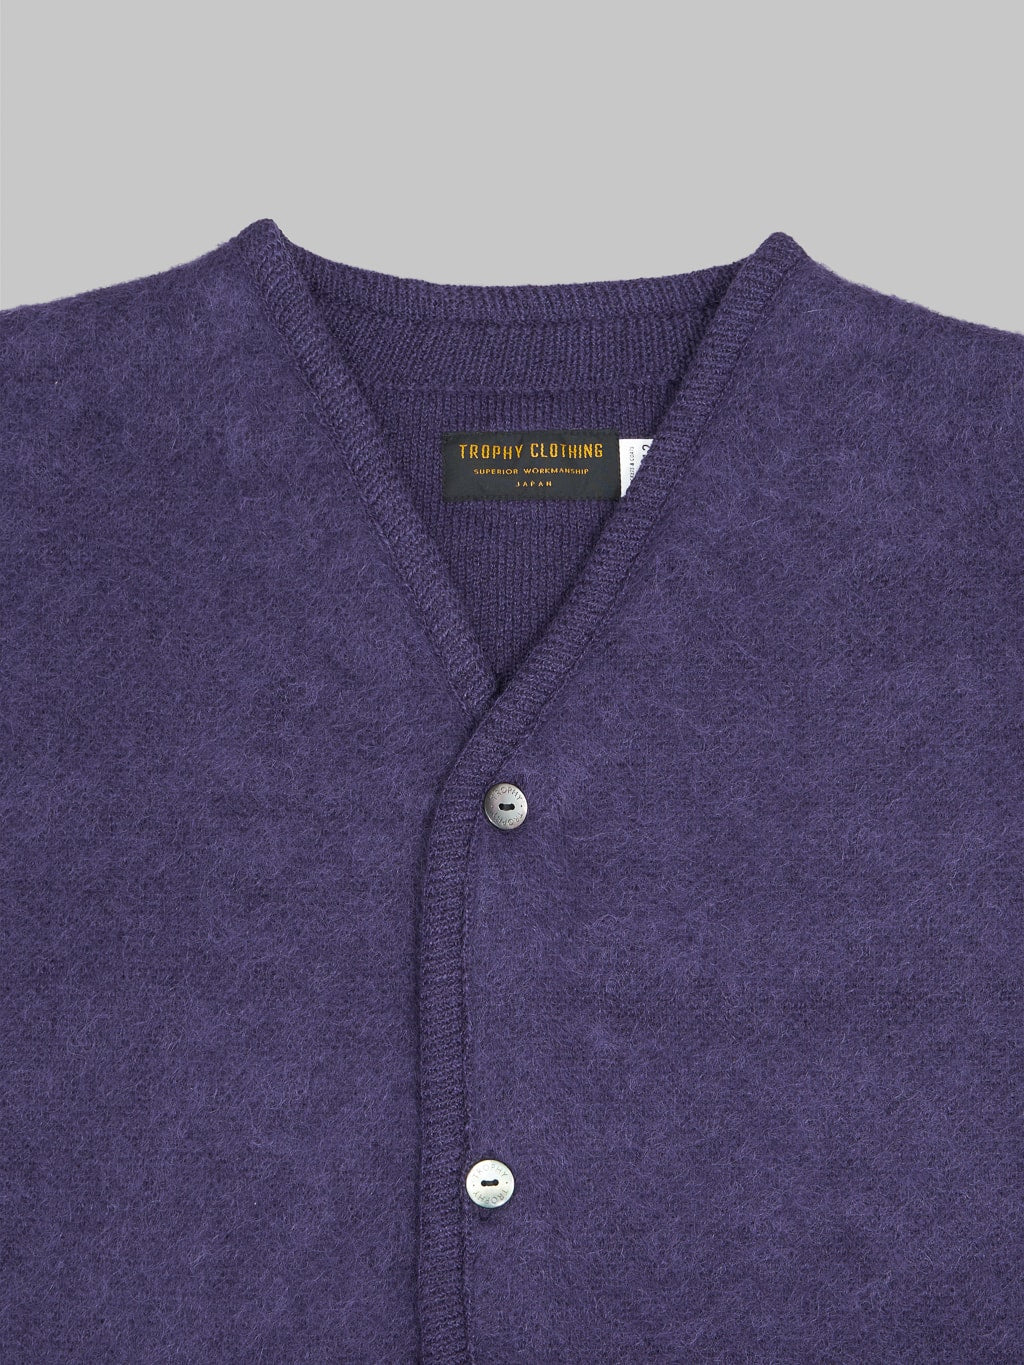 Trophy Clothing Mohair Knit Cardigan Dark Purple chest buttons